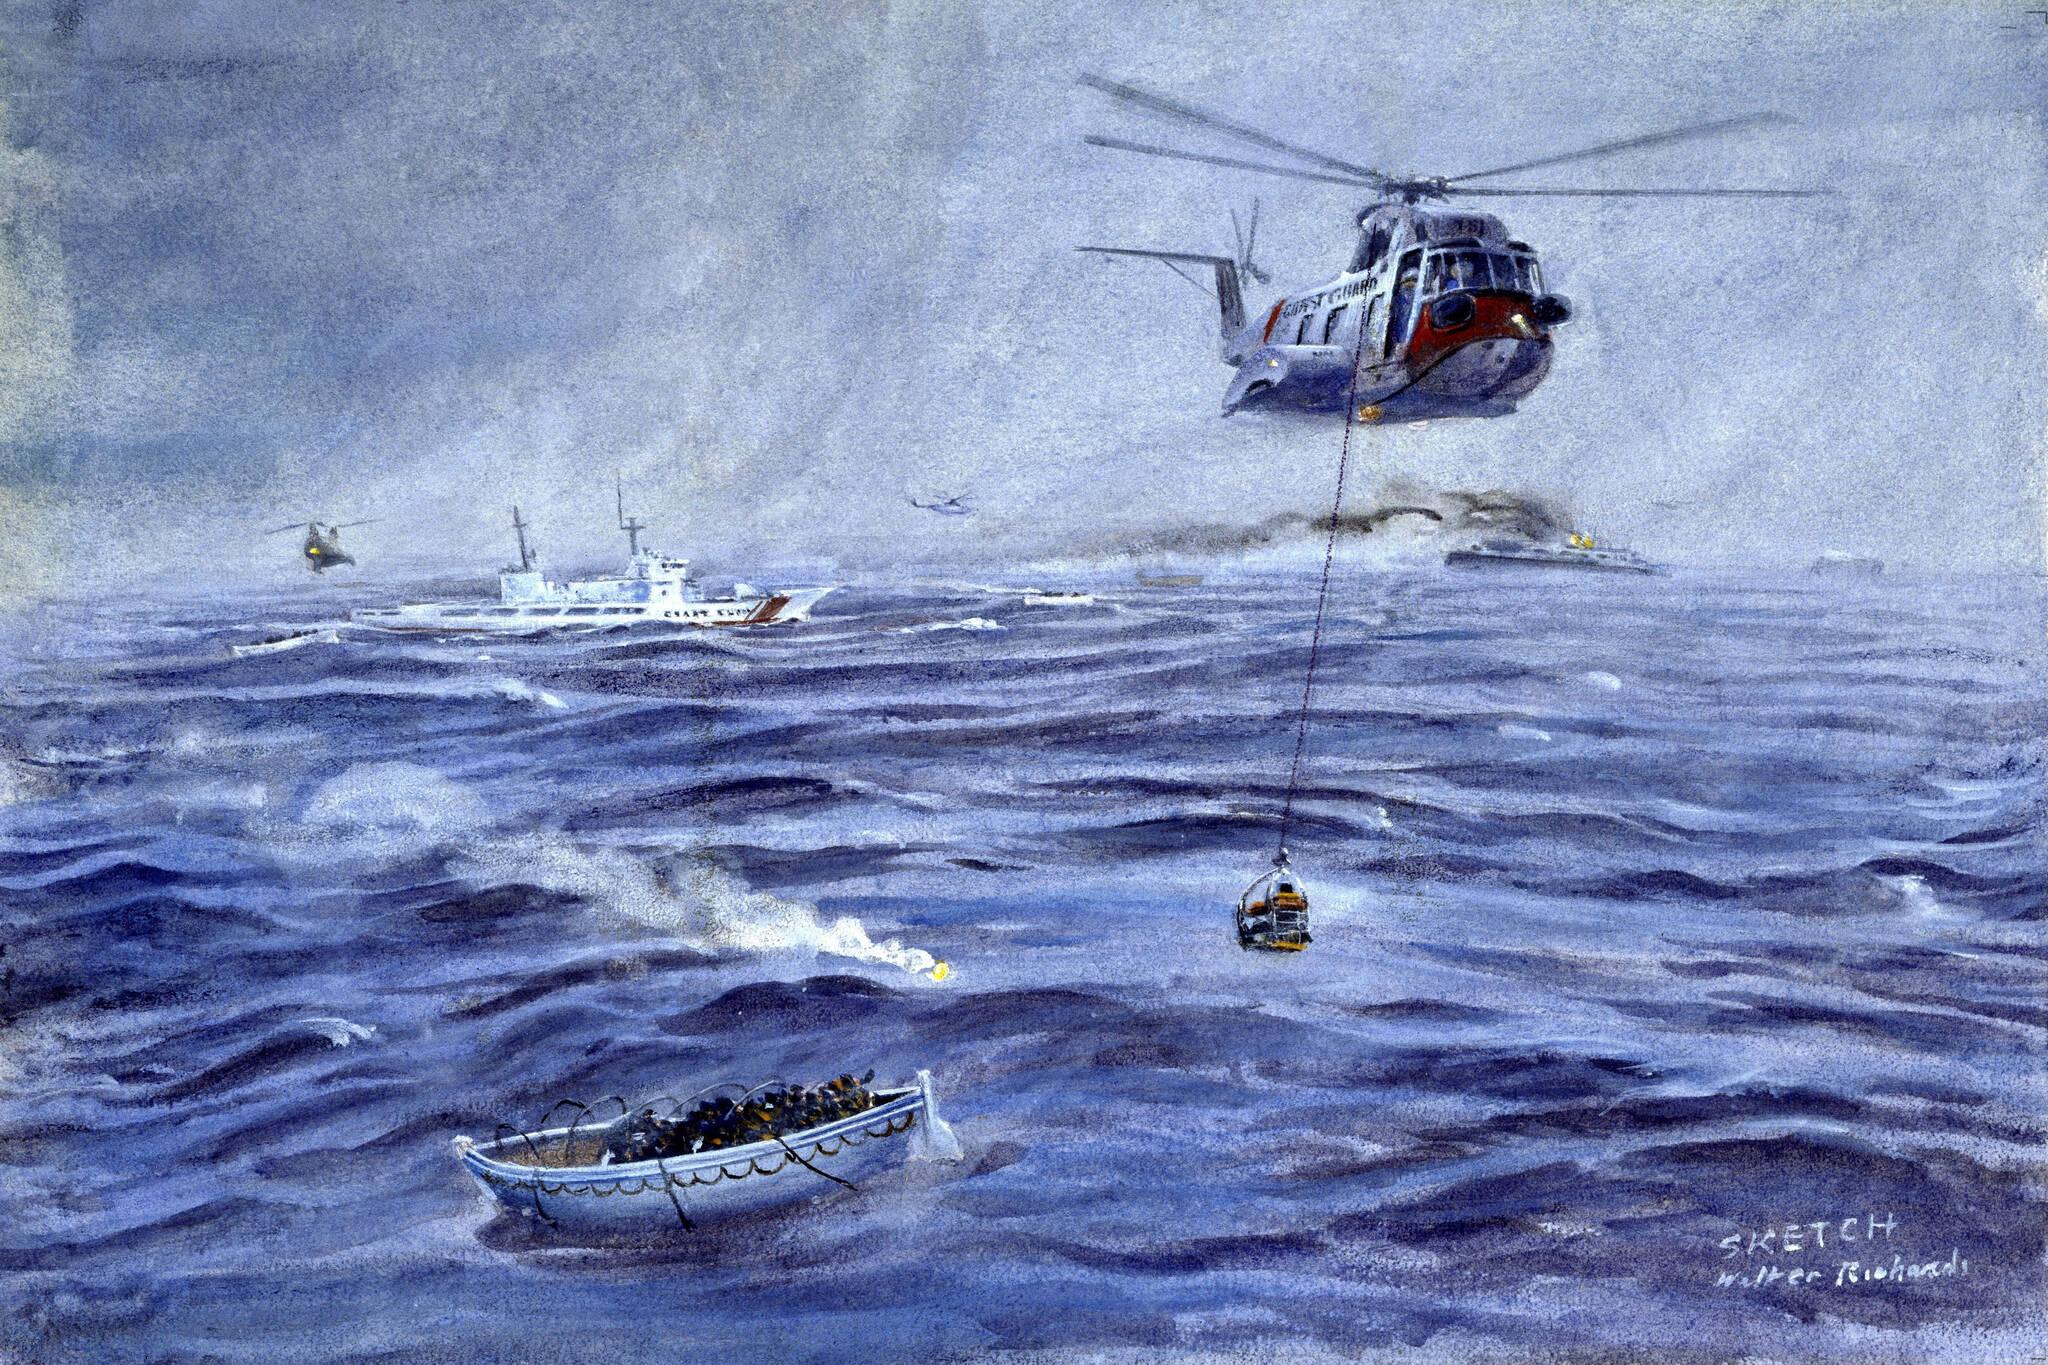 In 1980, U.S. Coast Guard helicopters and cutters, assisted by the U.S. Air Force and the Canadian armed forces as well as civilian rescue and relief organizations, rescued more than 500 passengers and crew from the cruise ship Prinsendam in the Gulf of Alaska. (Courtesy photo / U.S. Coast Guard)